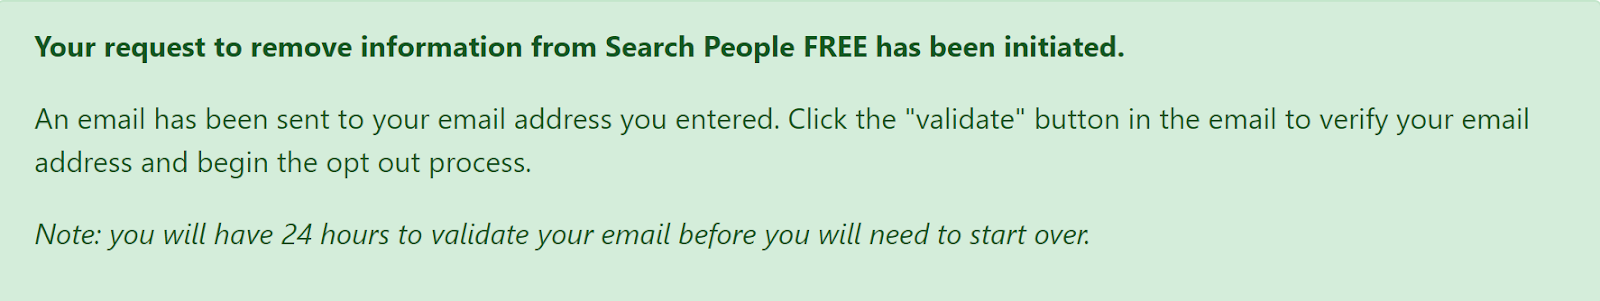 search people free removal